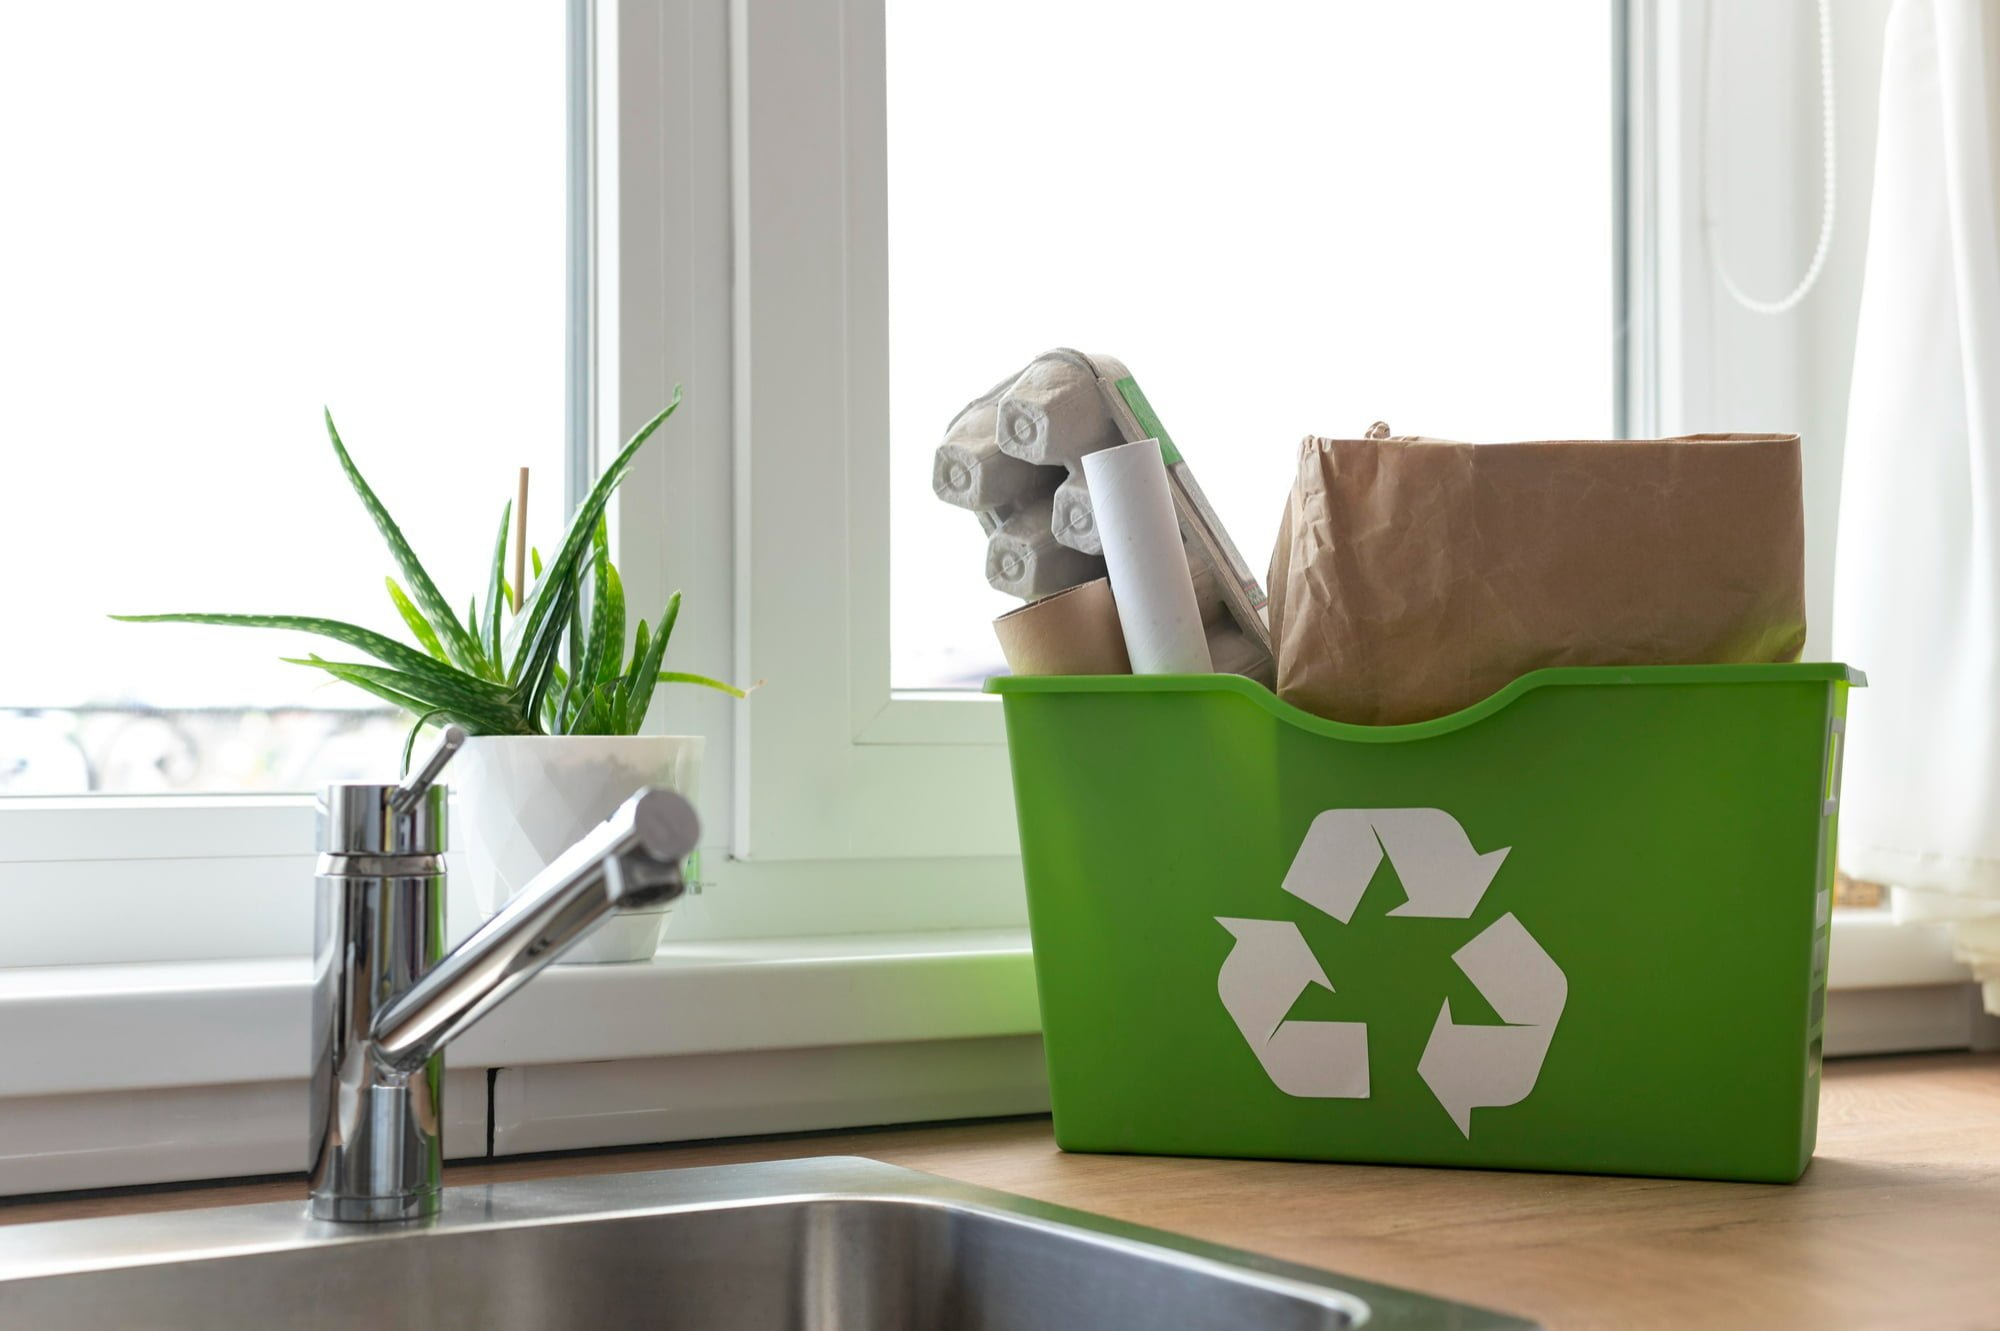 green recycling bin on kitchen counter showing apartment recycling initiatives